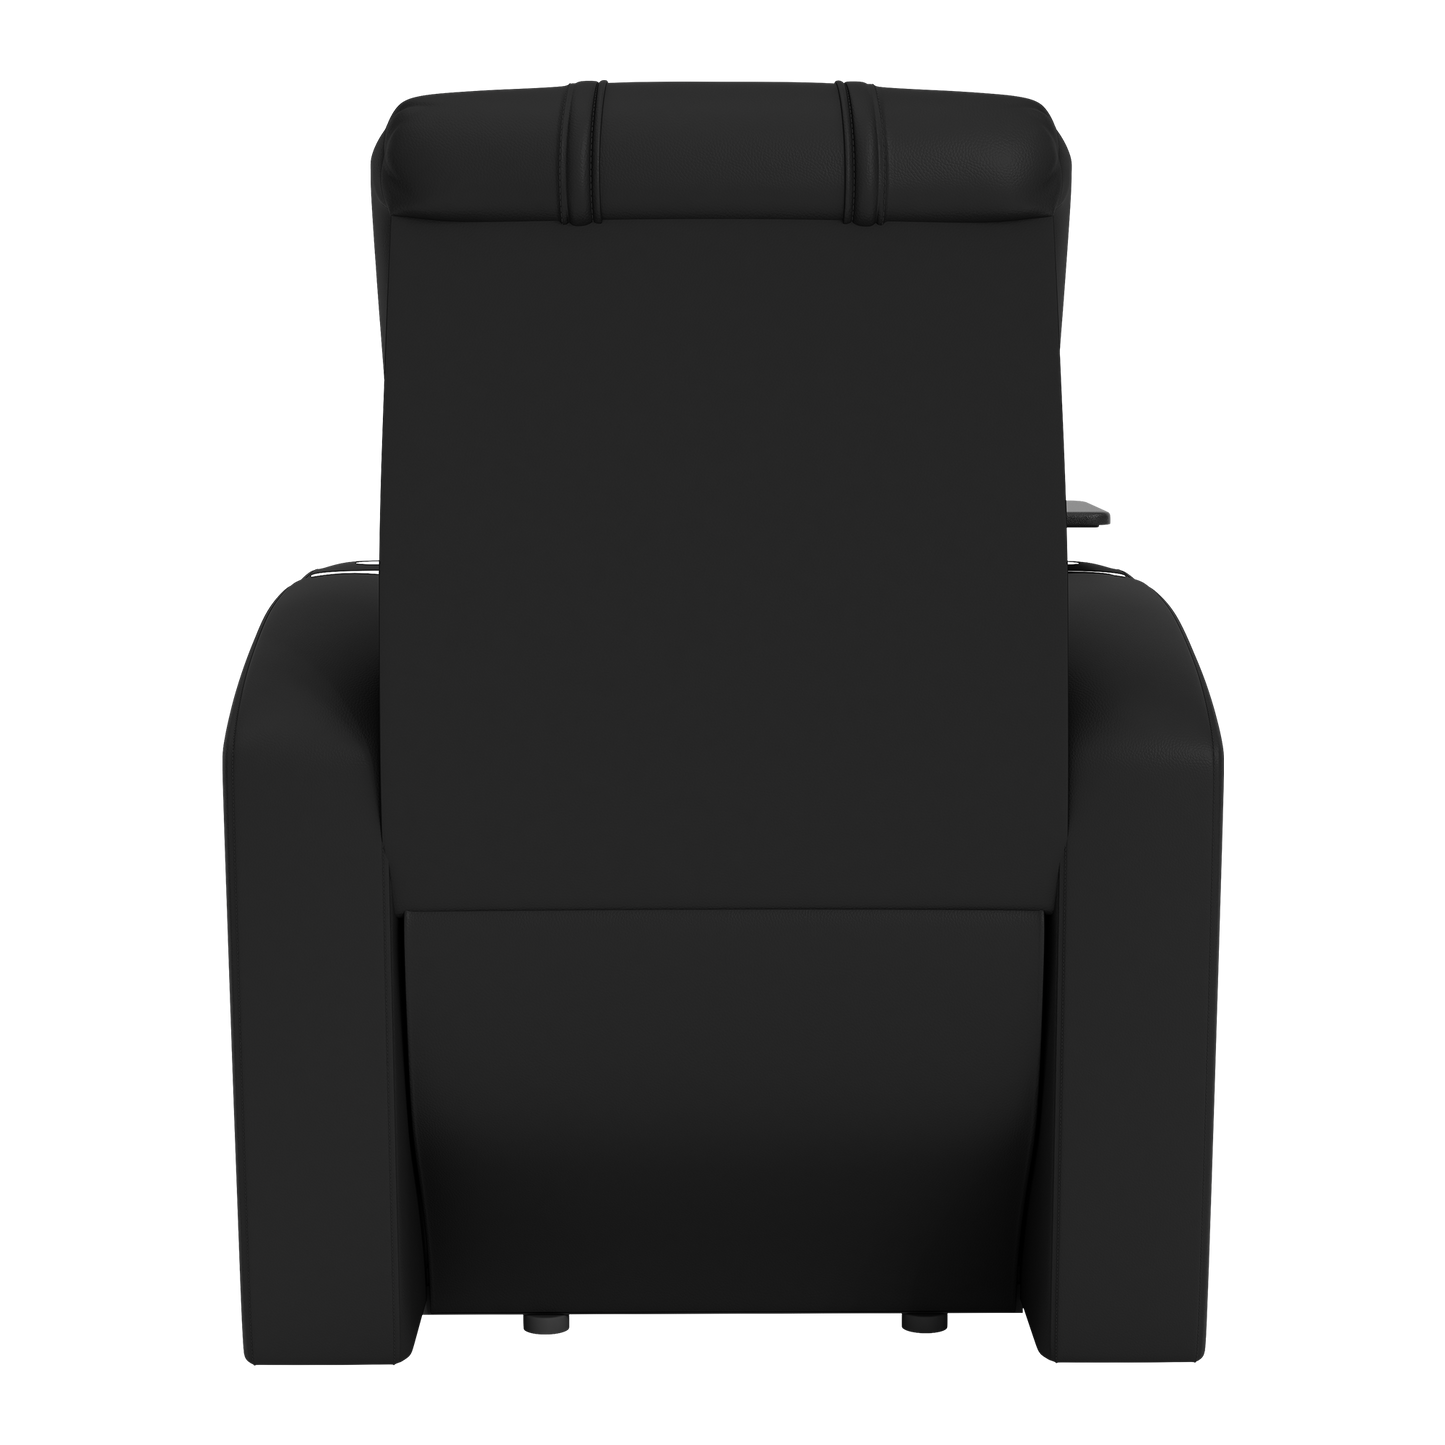 Stealth Power Plus Recliner with New York Jets Helmet Logo